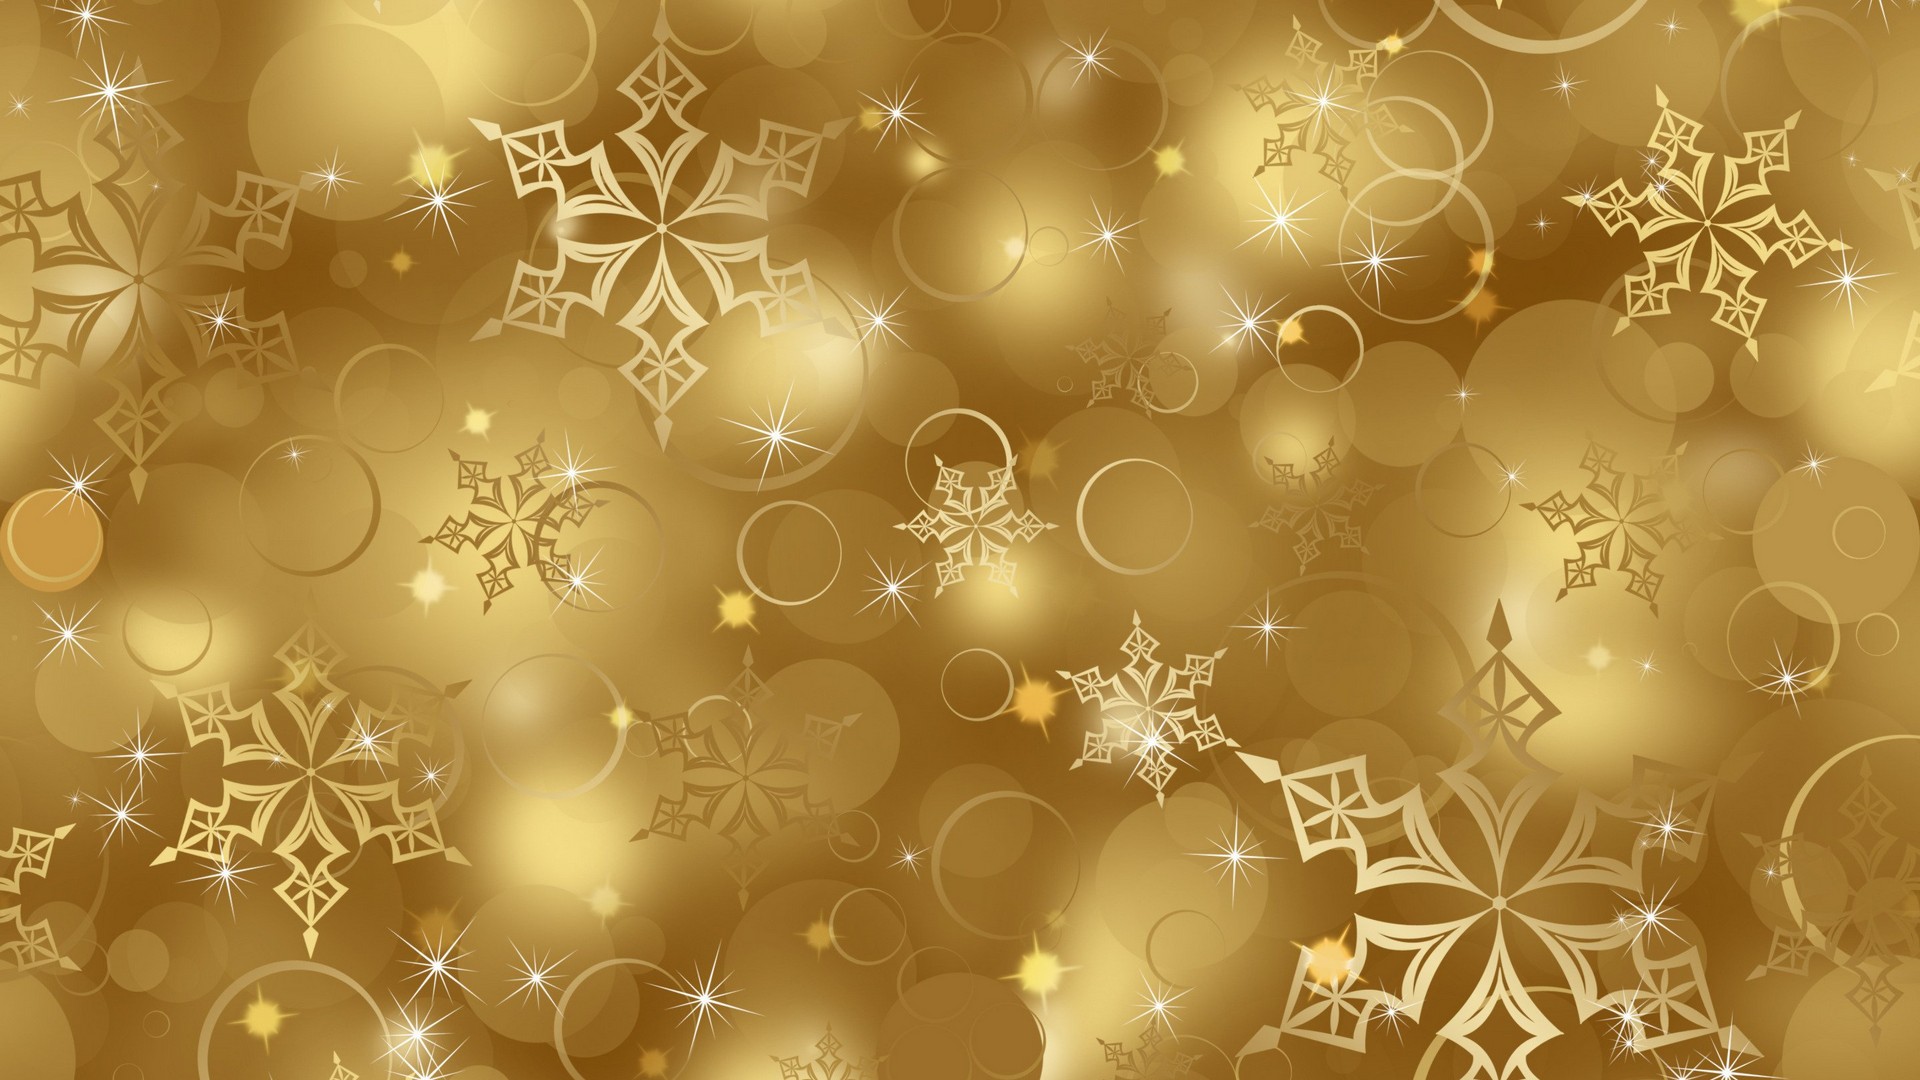 HD Wallpaper Gold Sparkle With Resolution 1920X1080